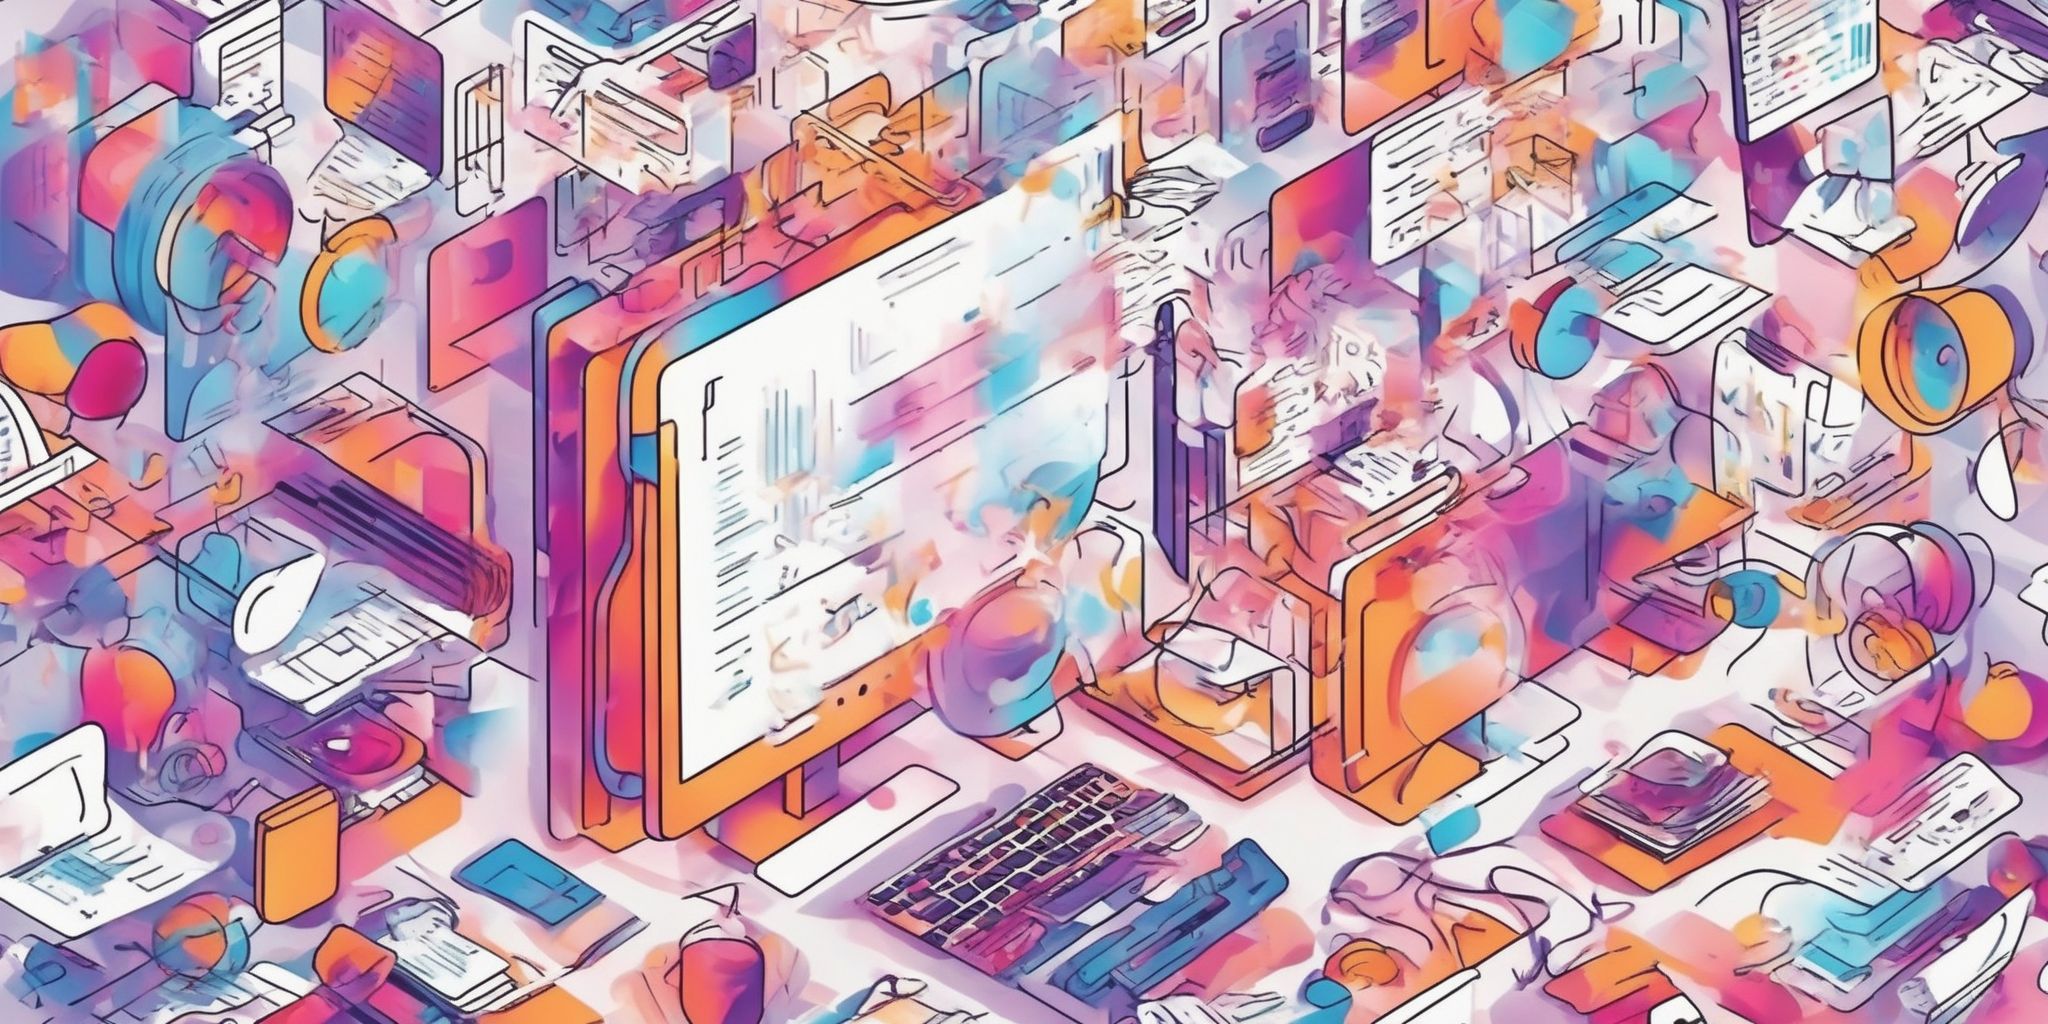 Information overload in illustration style with gradients and white background